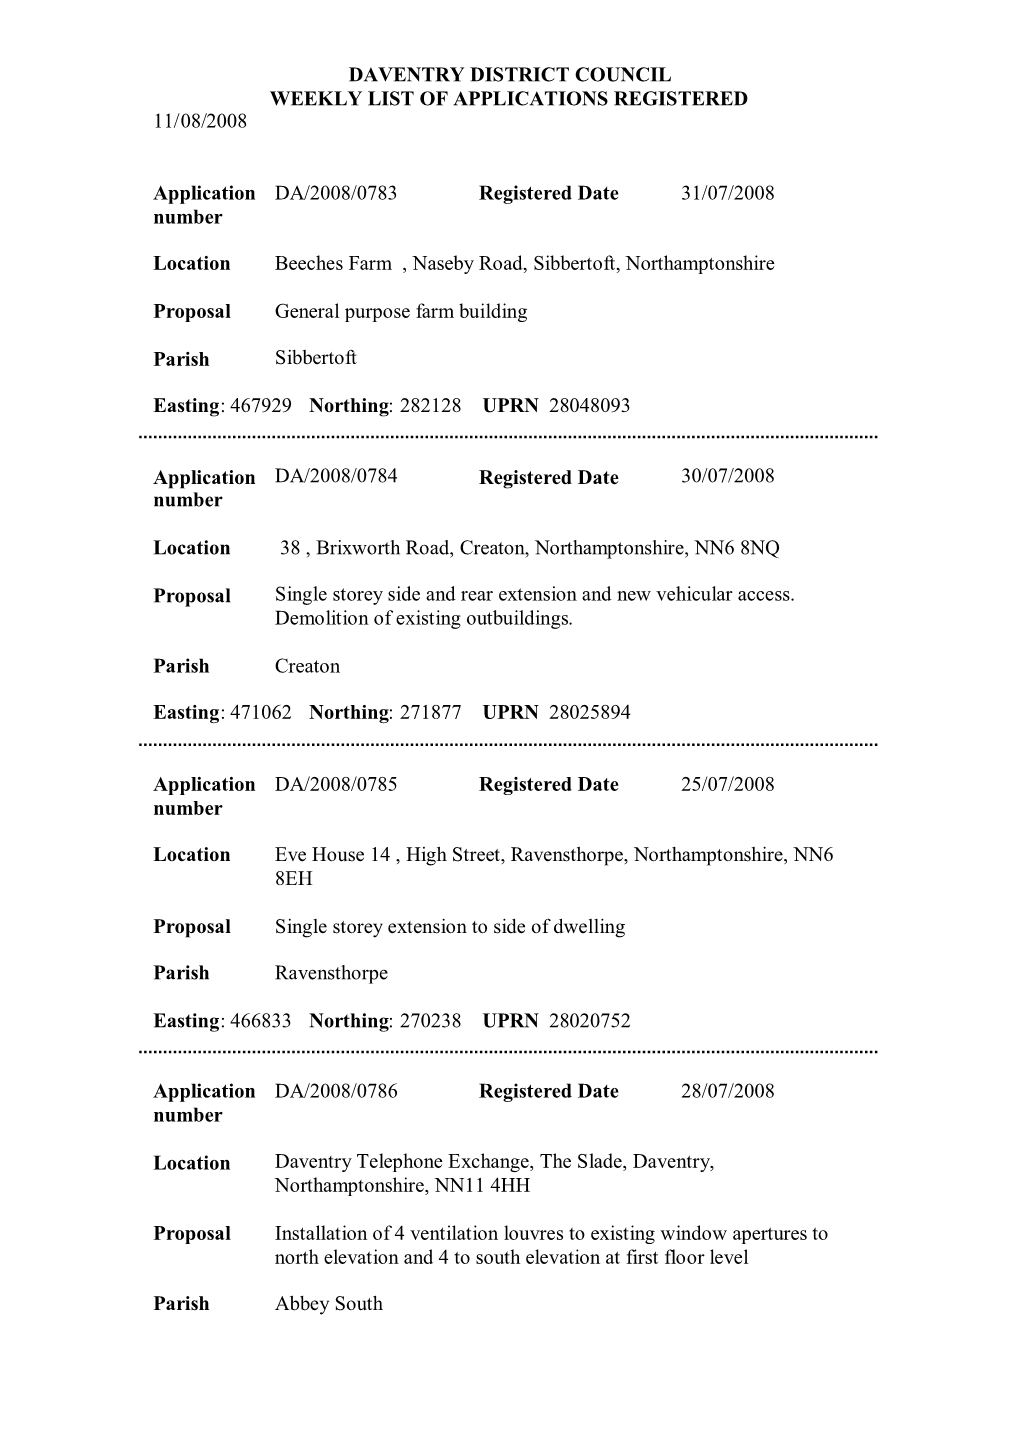 Daventry District Council Weekly List of Applications Registered 11/08/2008